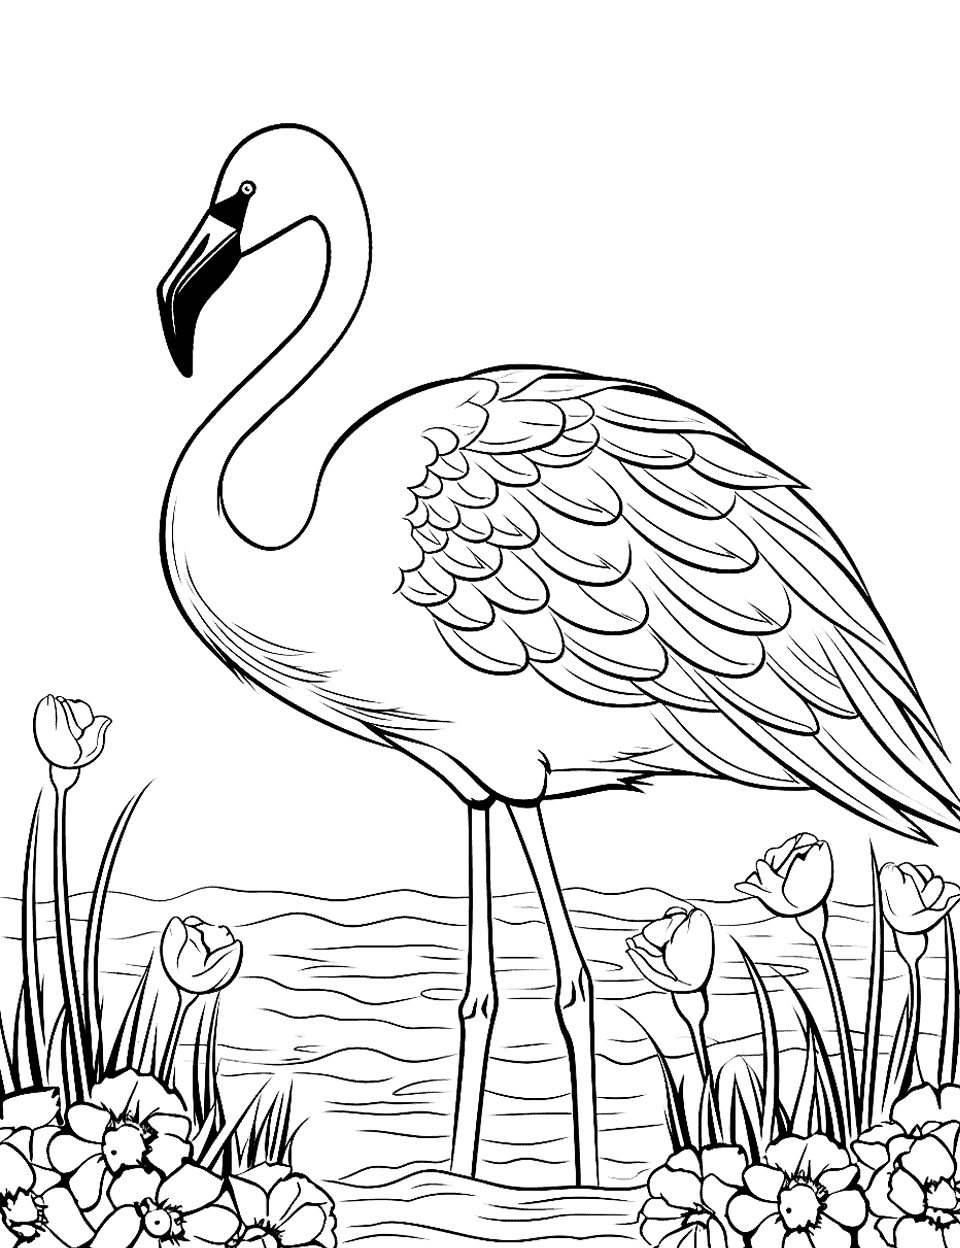 Garden Flamingo Among Flowers Coloring Page - A flamingo standing elegantly in a garden full of various flowers and plants.